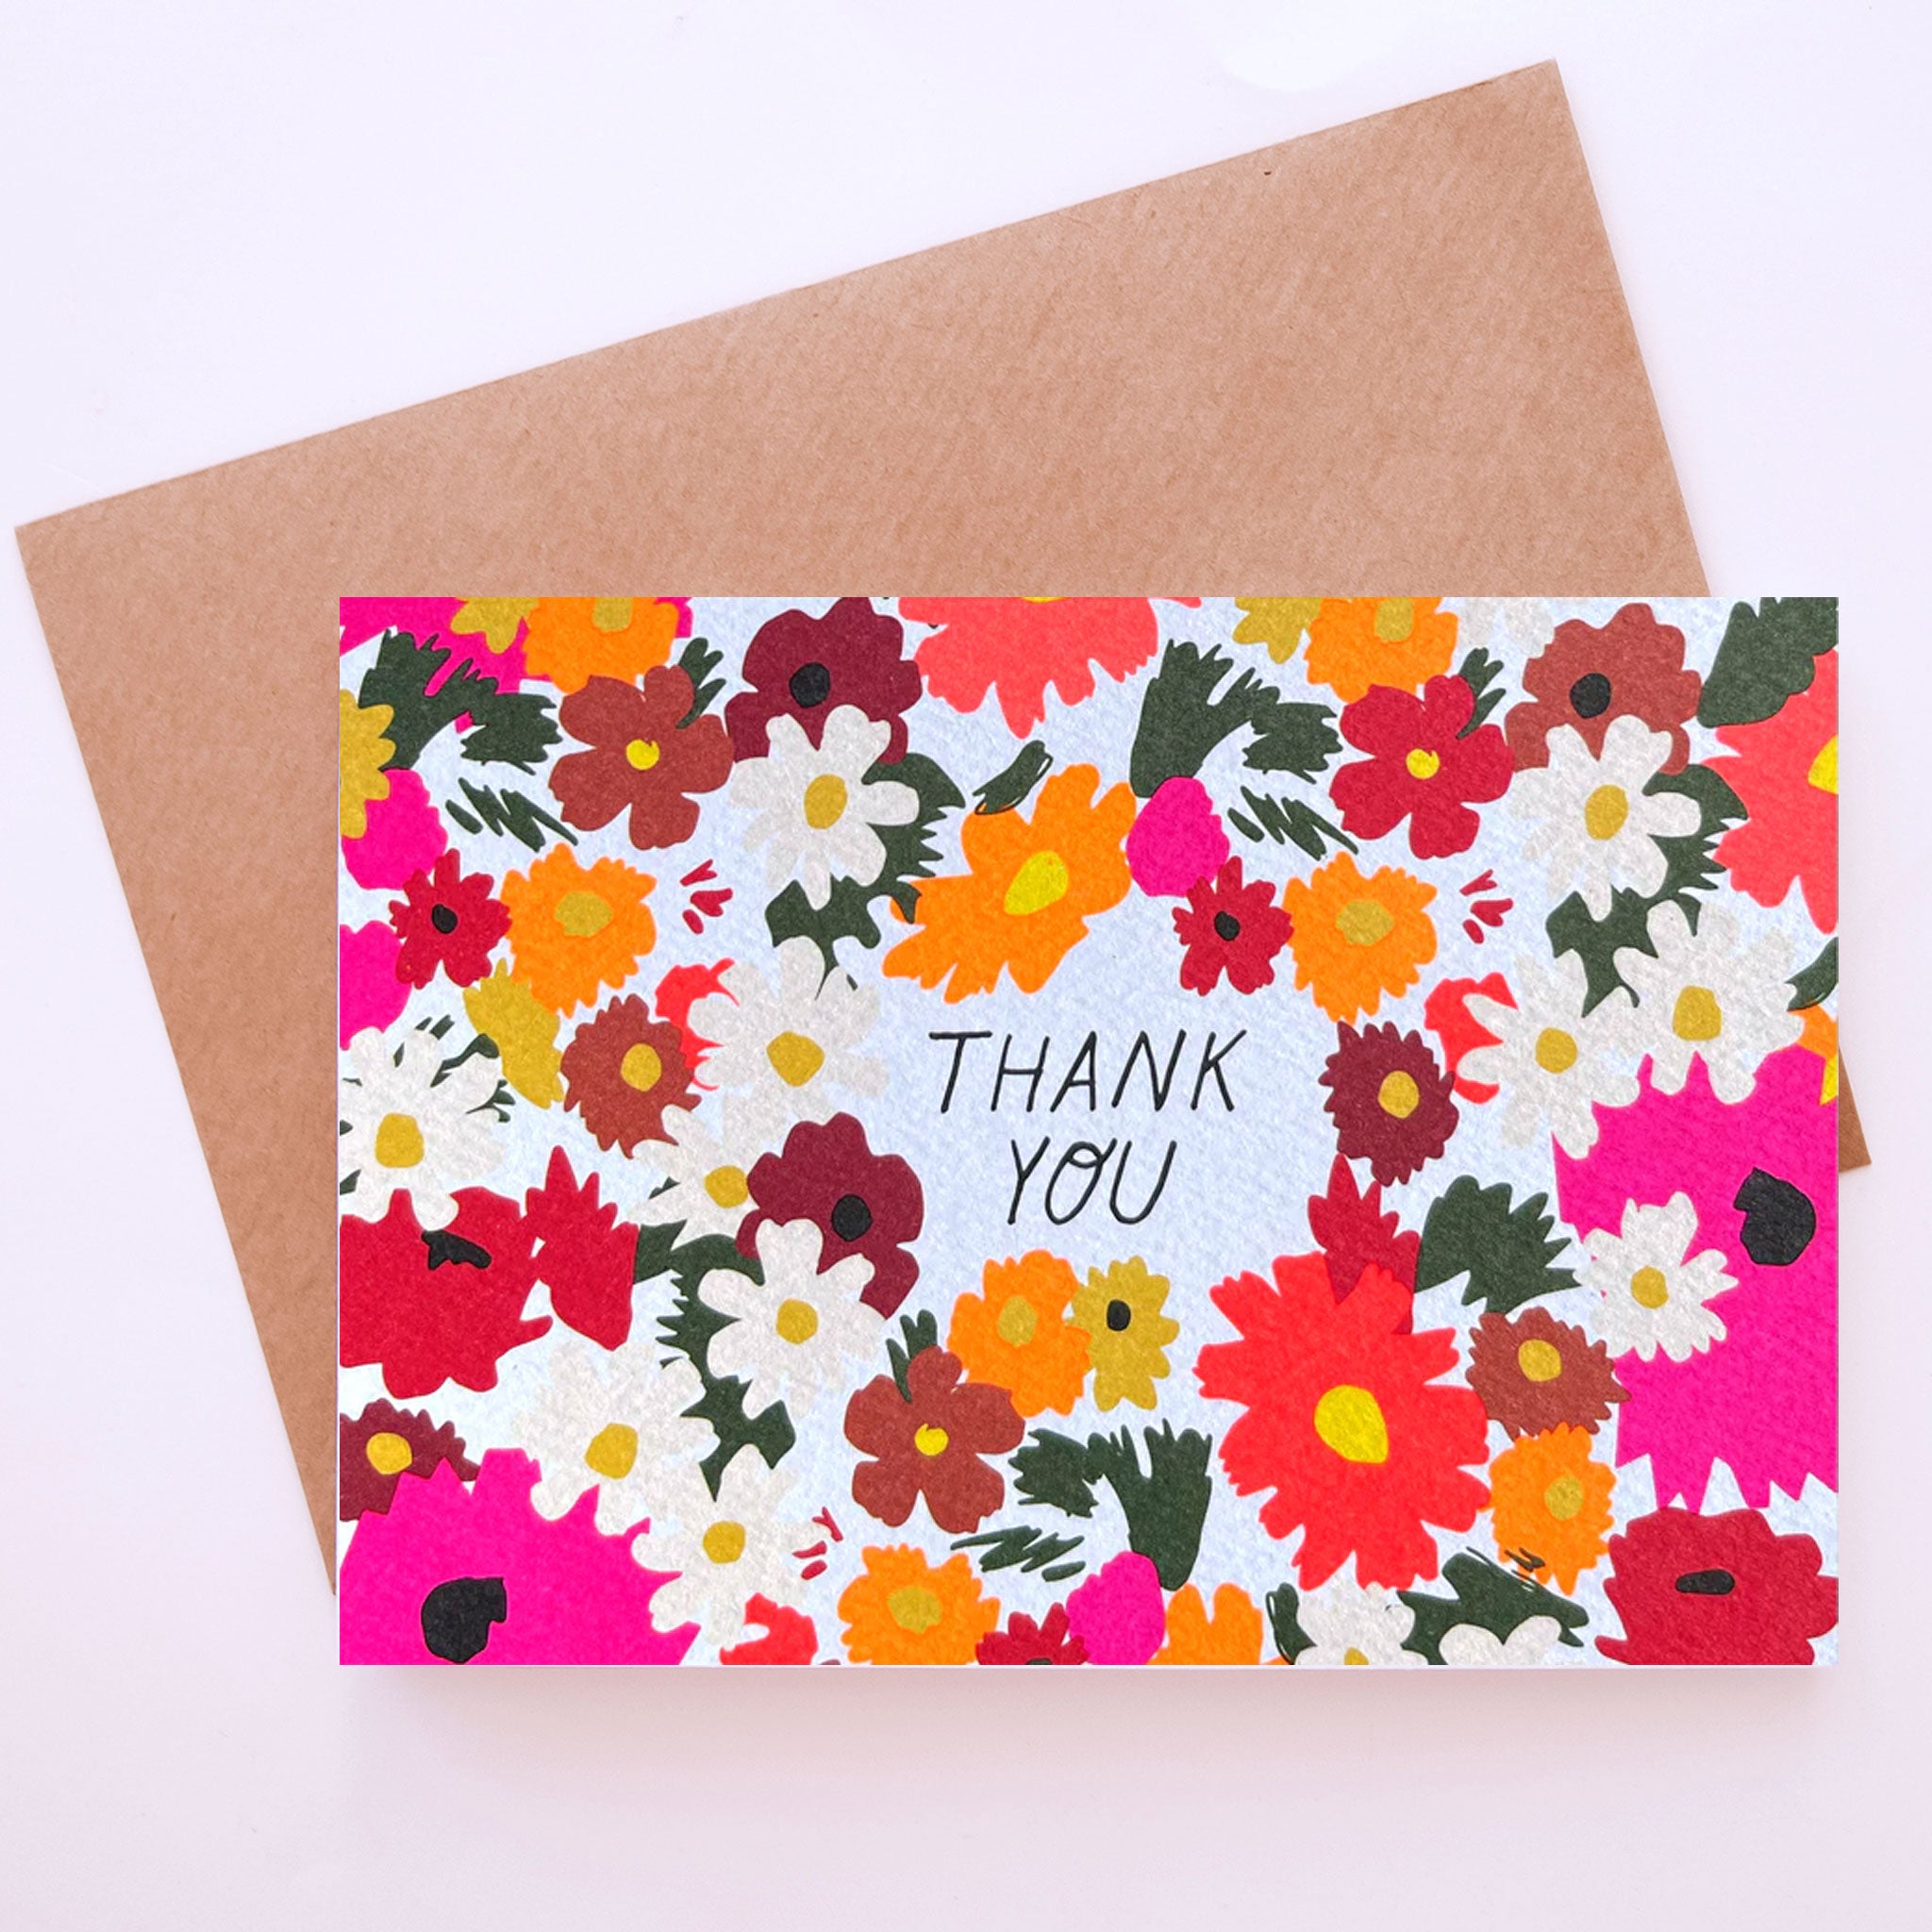 On a neutral background is a floral print card with red, white, orange and pink flowers on the front as well as text in the center that reads, "Thank You". 